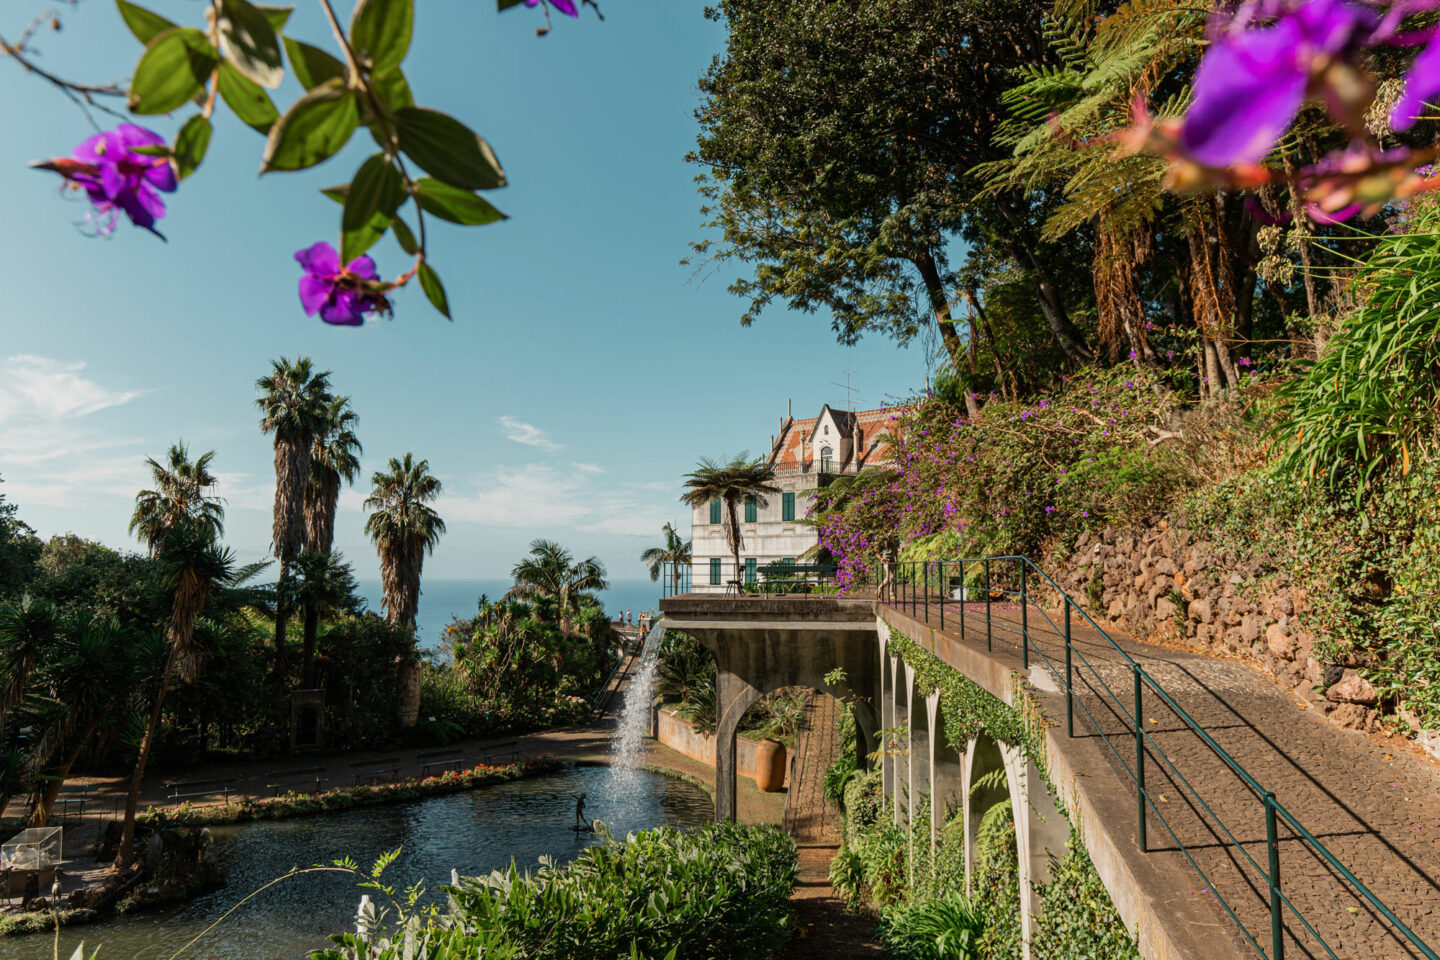 Monte Palace Tropical Gardens-Top-things-to-do-in-madeira-Bucket-list--Instagram-Story-Template--kelseyinlondon-Kelsey-Heinrichs--What-to-do-in-madeira--Where-to-go-in-madeira-top-places-in-madeira-